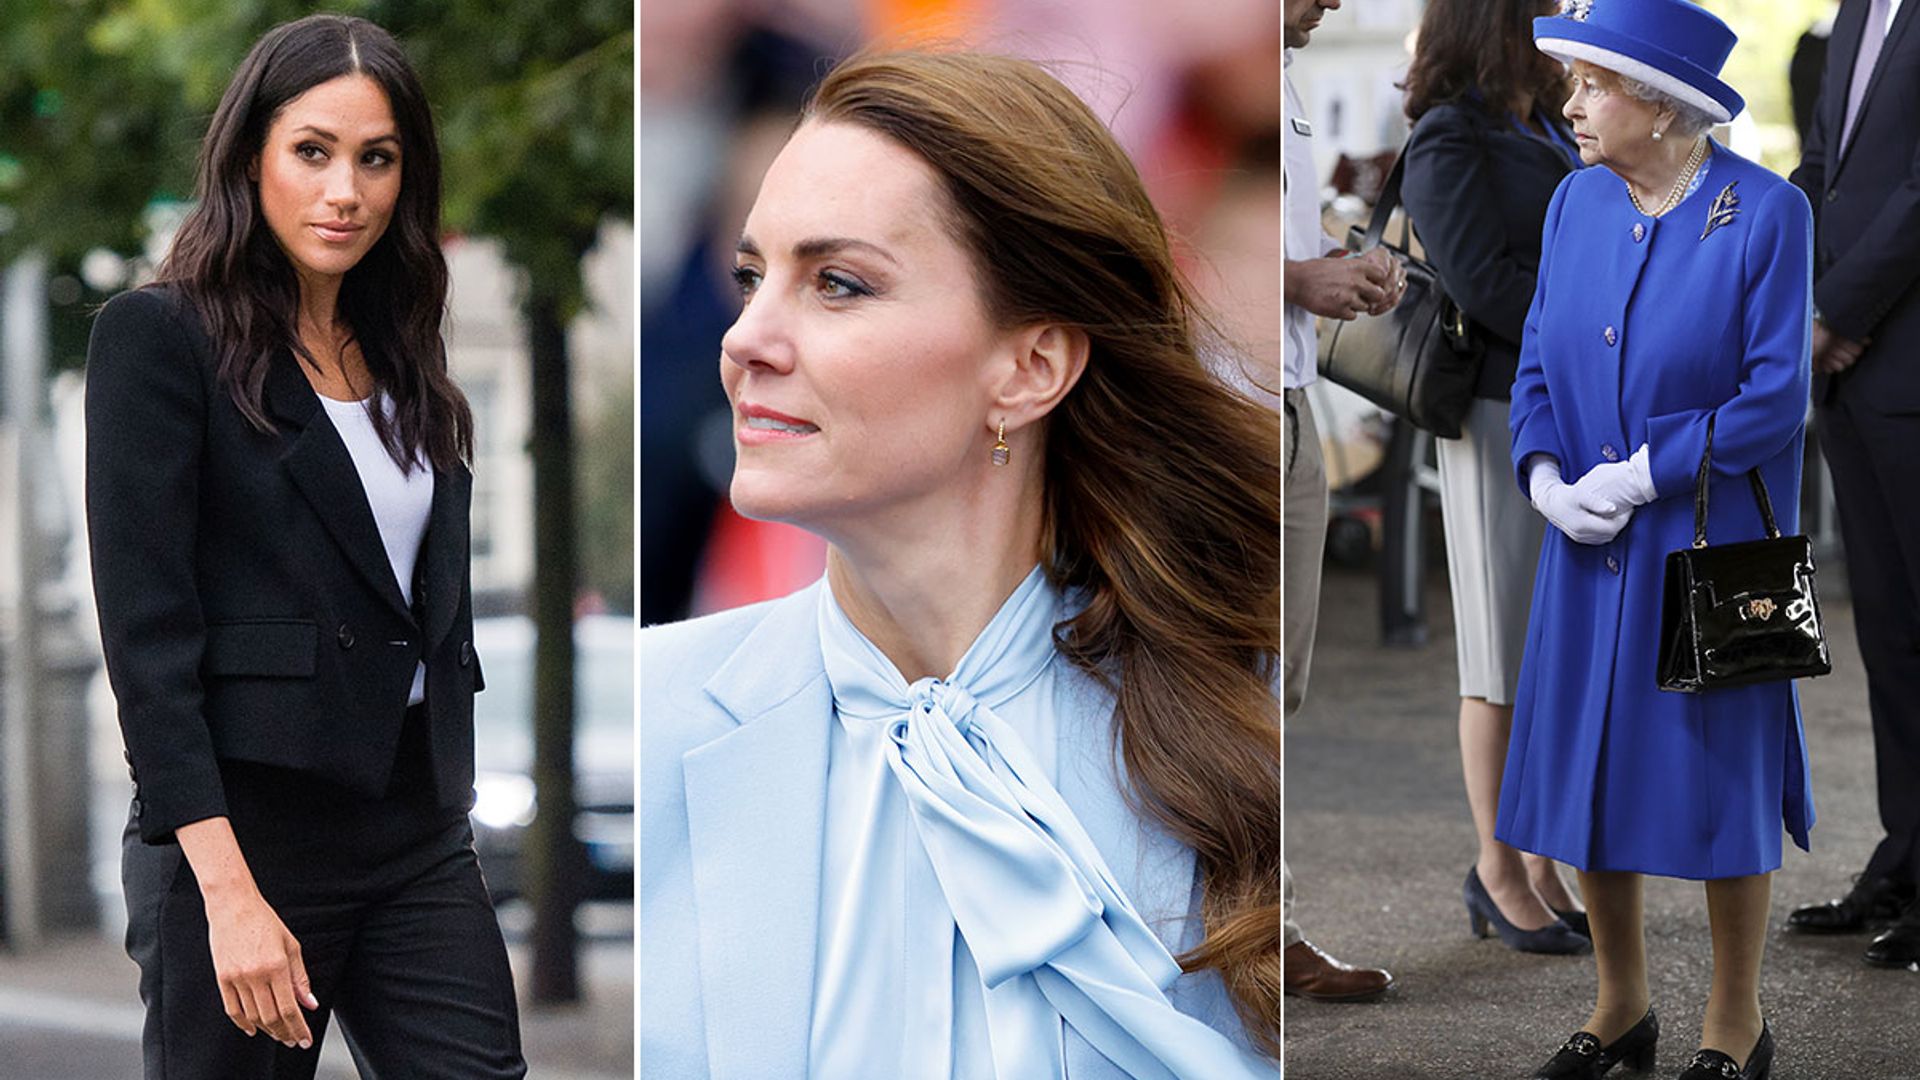 6 times the royals were heckled on public engagements – see their classy responses